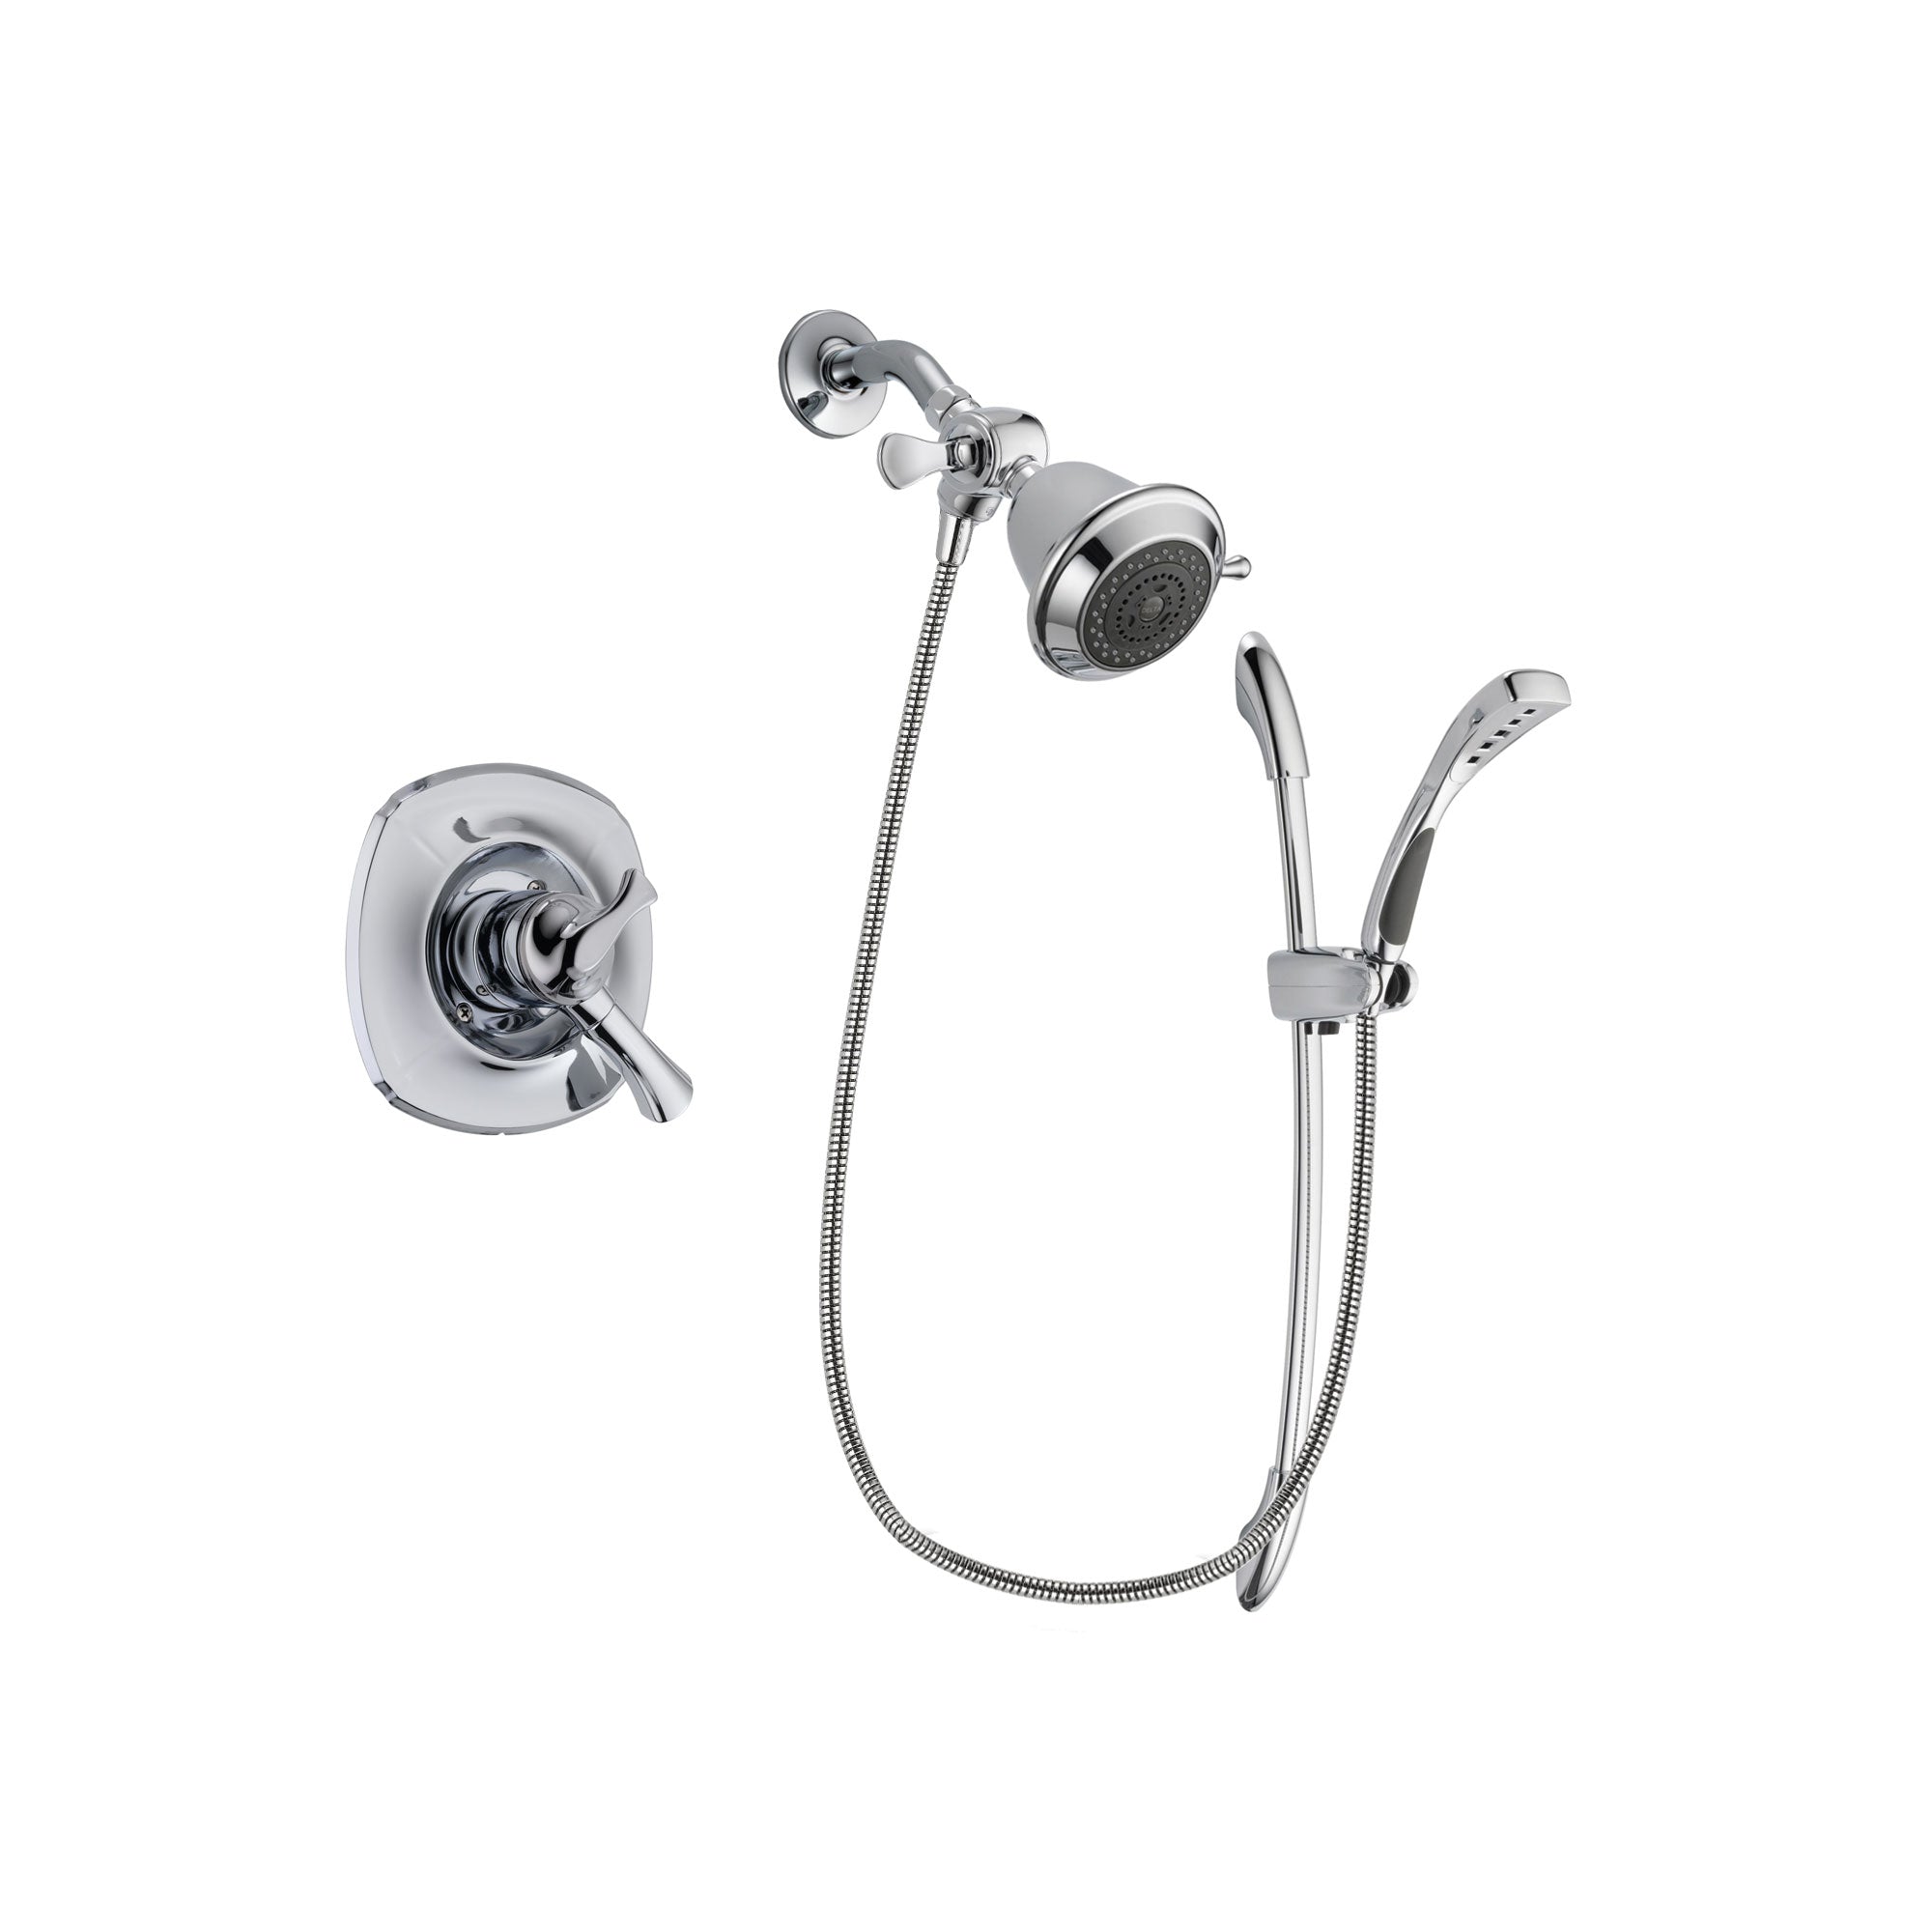 Delta Addison Chrome Finish Dual Control Shower Faucet System Package with Shower Head and Handheld Shower with Slide Bar Includes Rough-in Valve DSP0454V